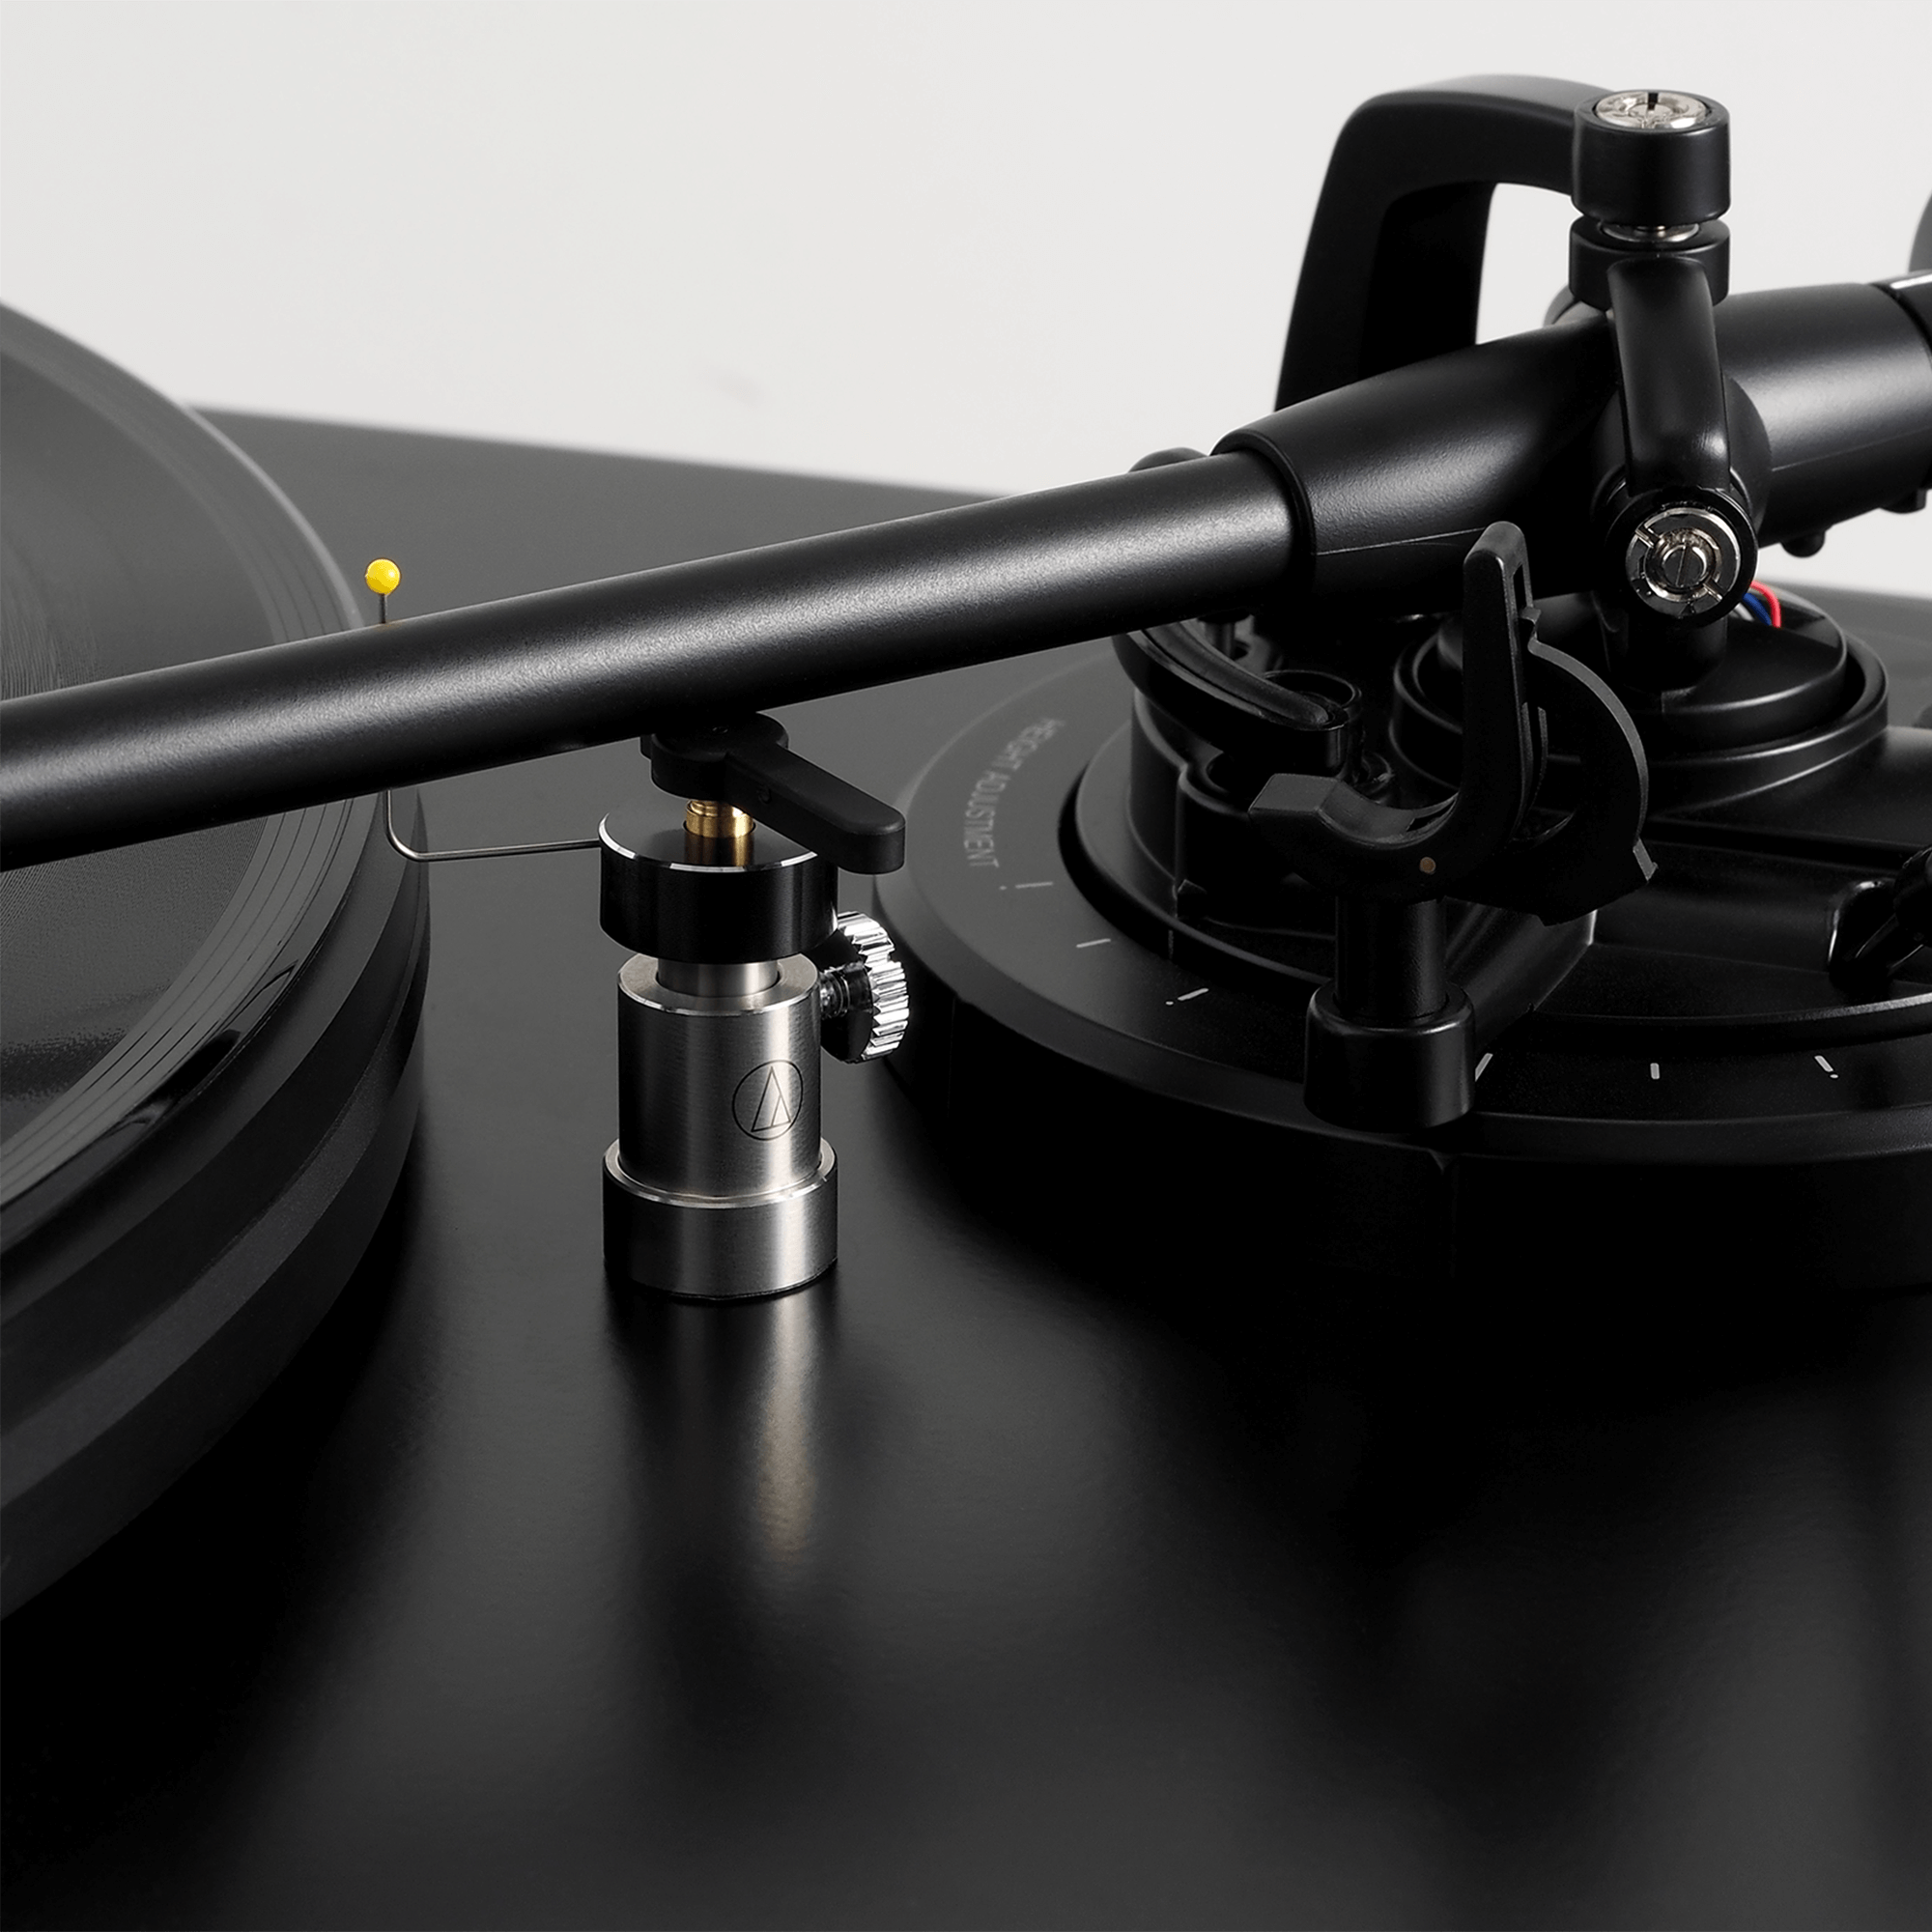 Audio-Technica AT60006R Safety Tonearm Lifter